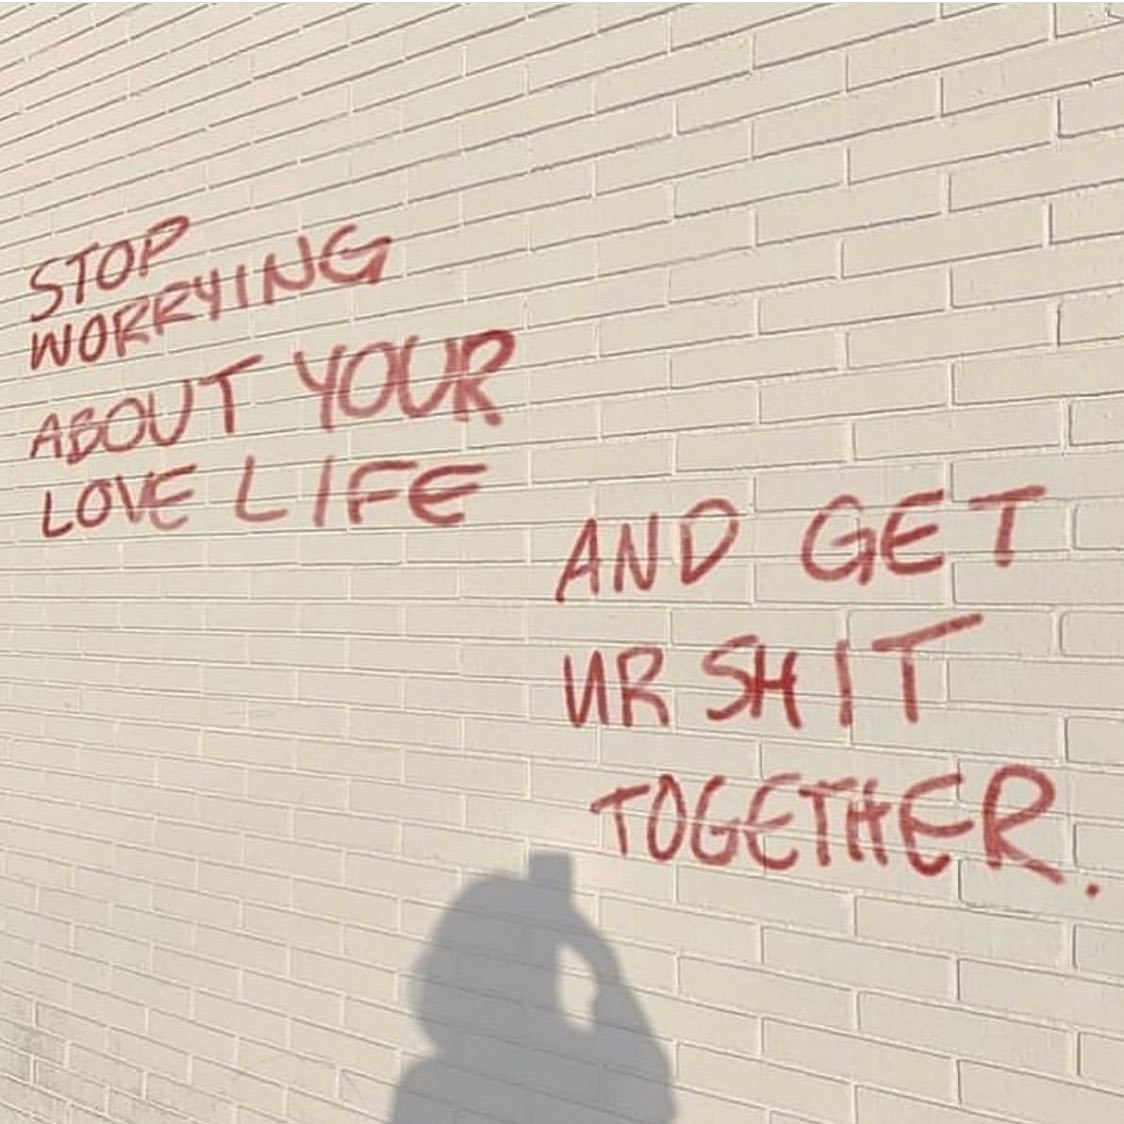 Stop woeeying about your love life and get ur shit together.